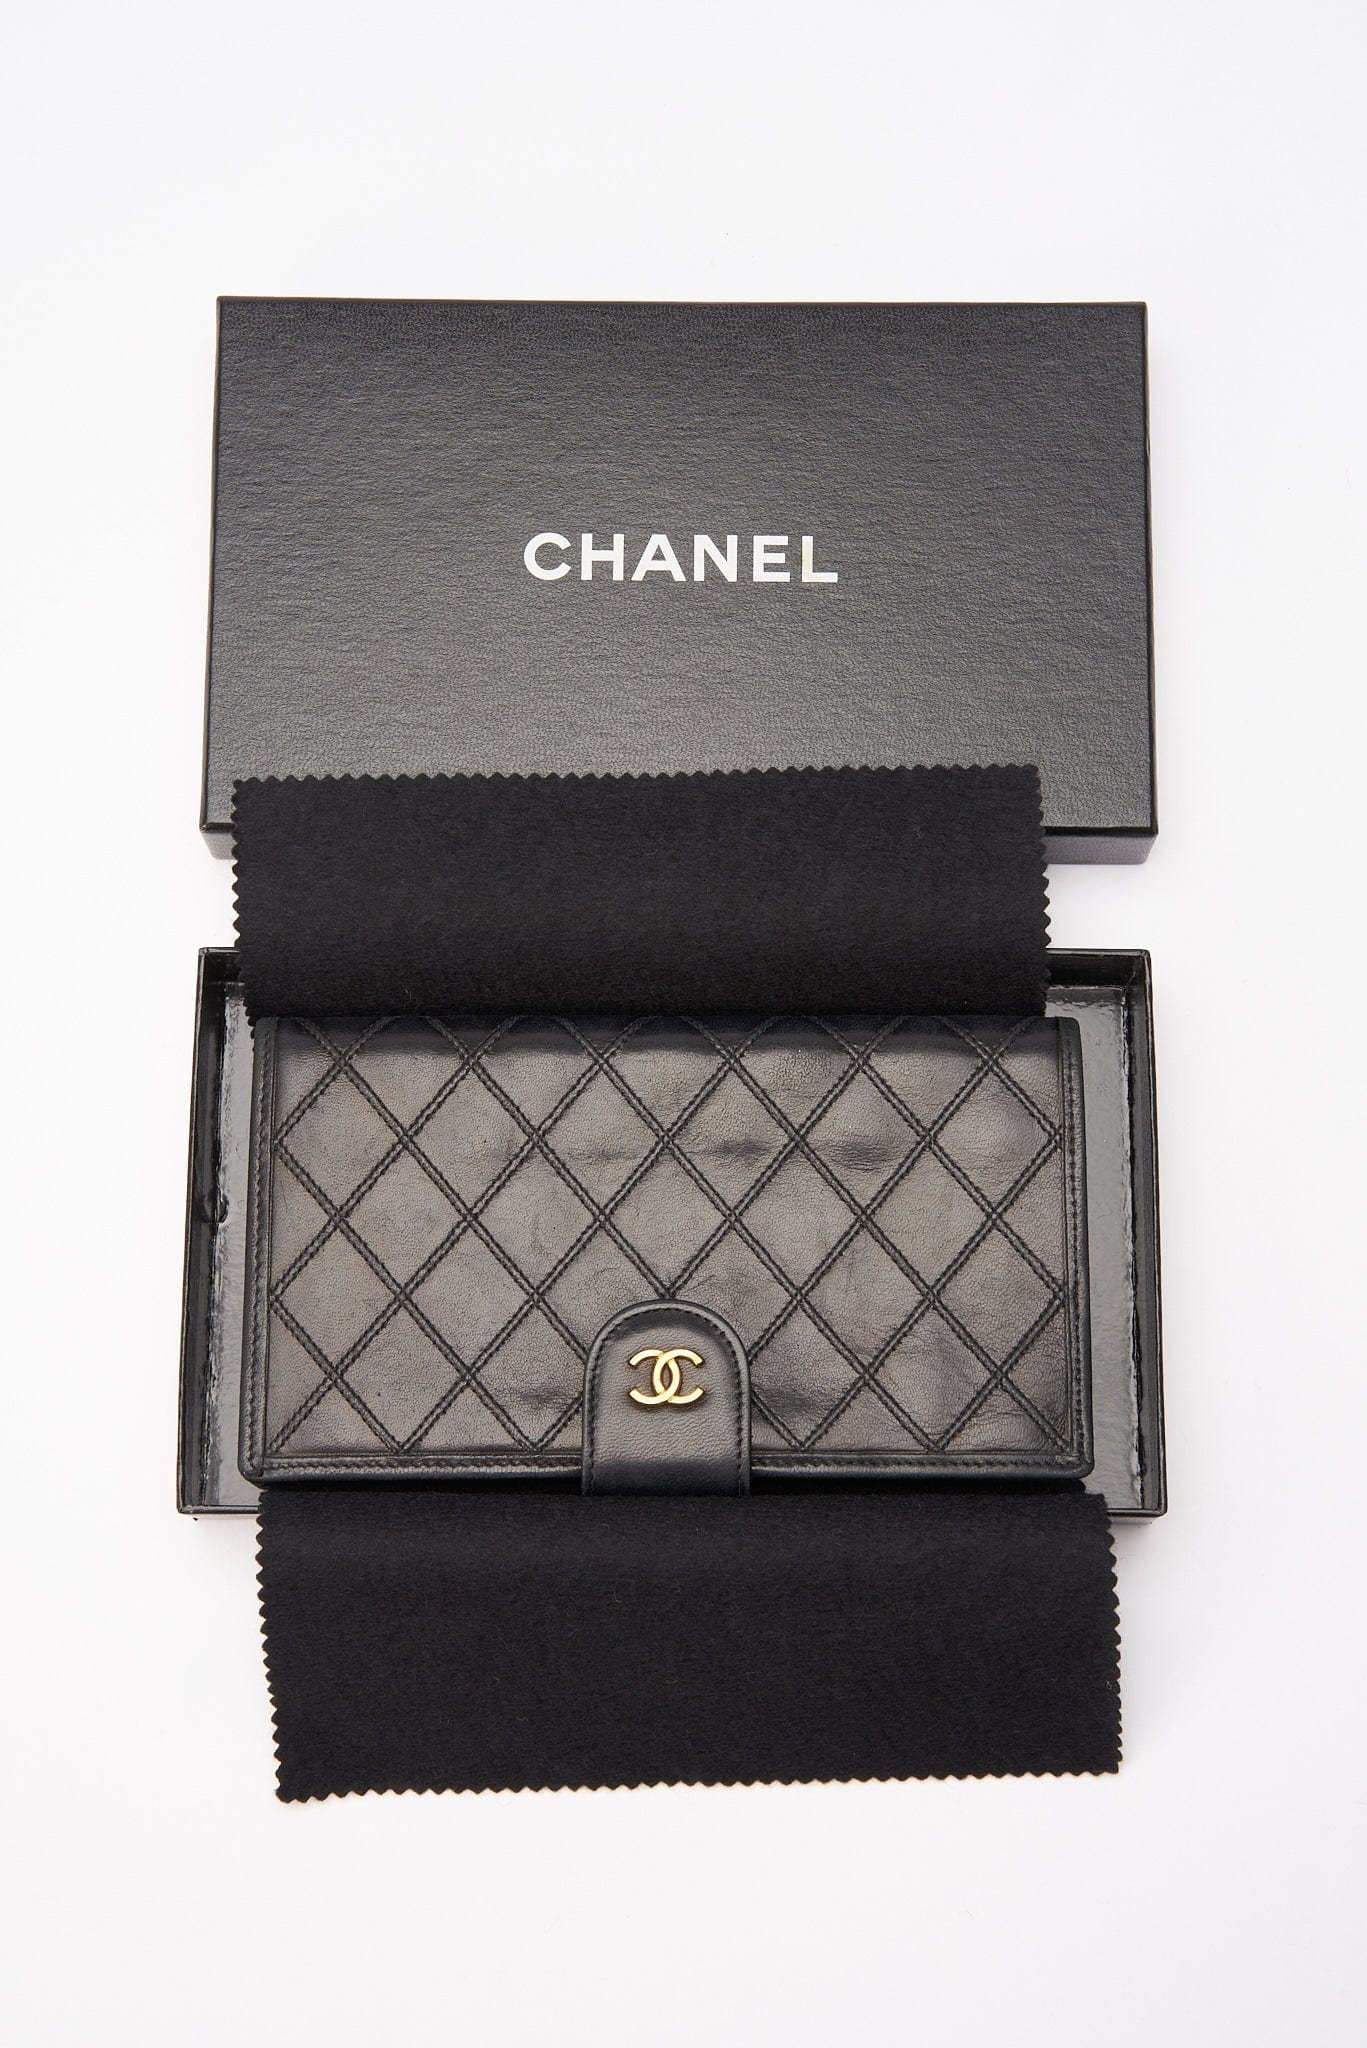 Chanel Black Quilted Lambskin Vintage Wallet